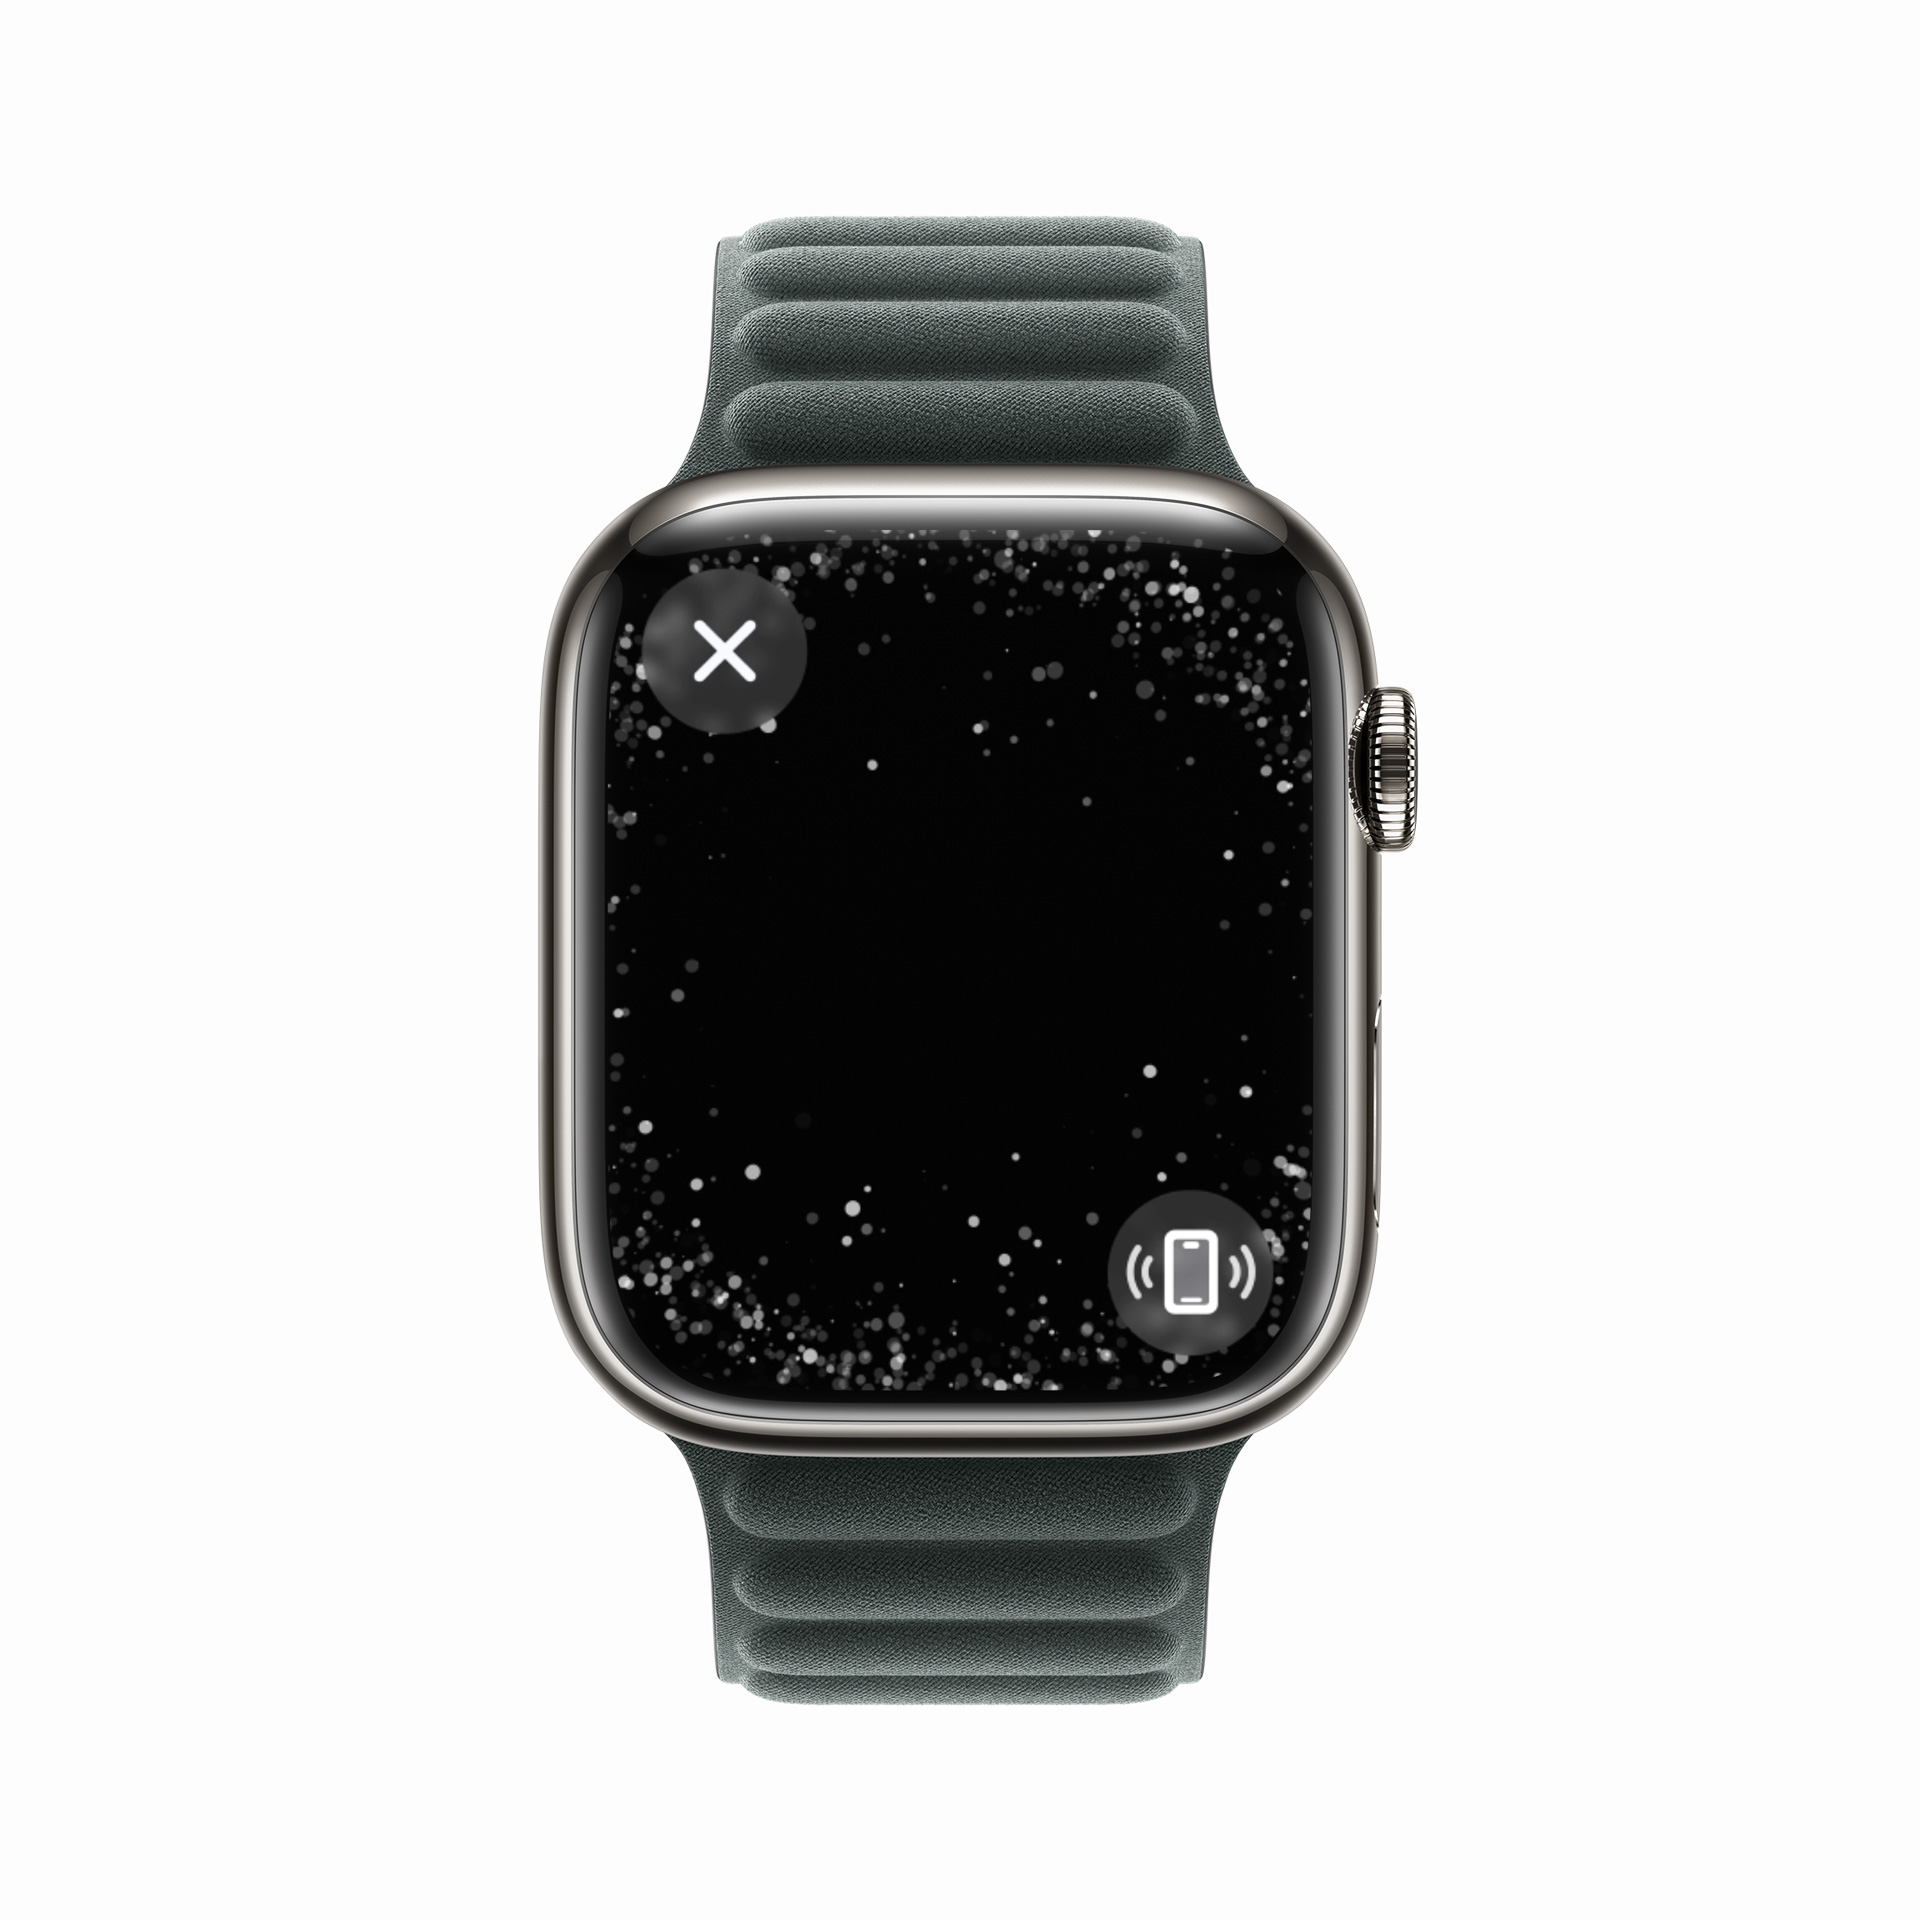 Apple Watch Series 9 review: Upgrade for this key feature (no